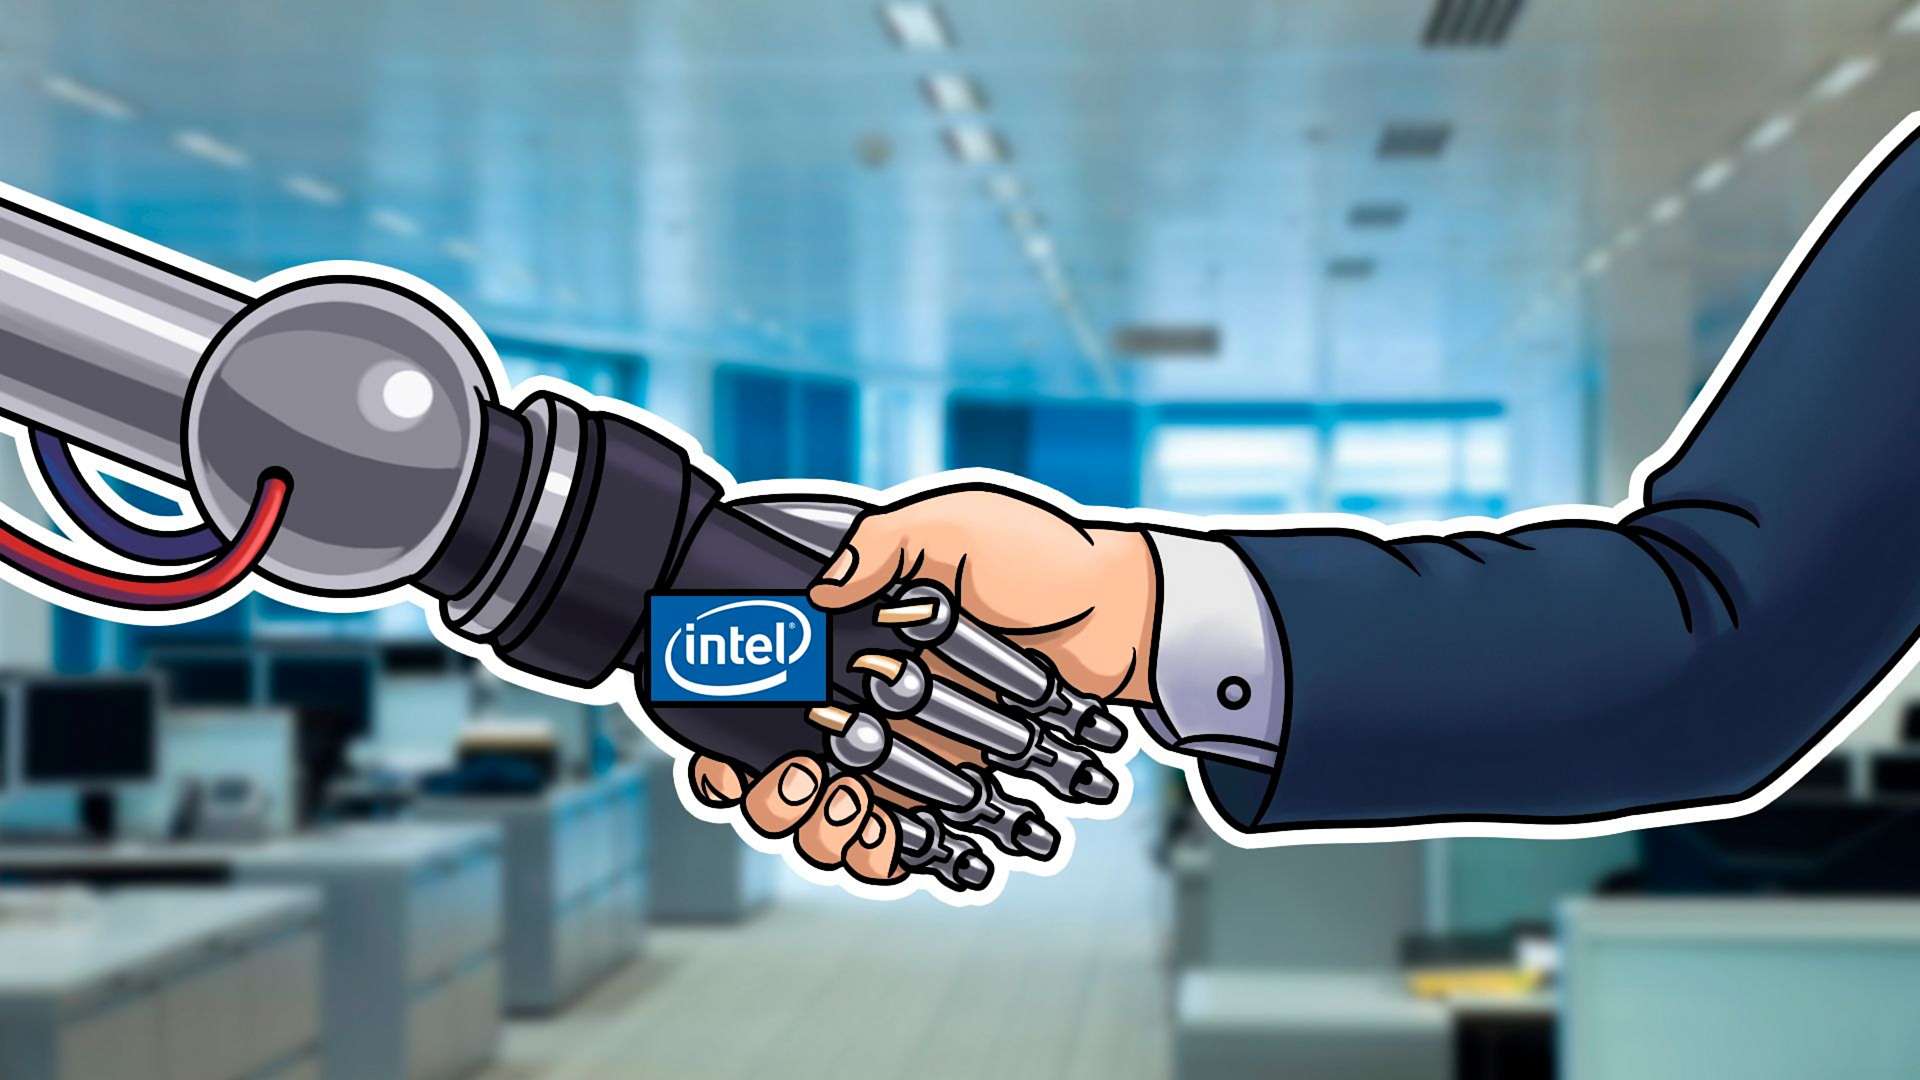 Intel presented fresh research and solutions for smart factory